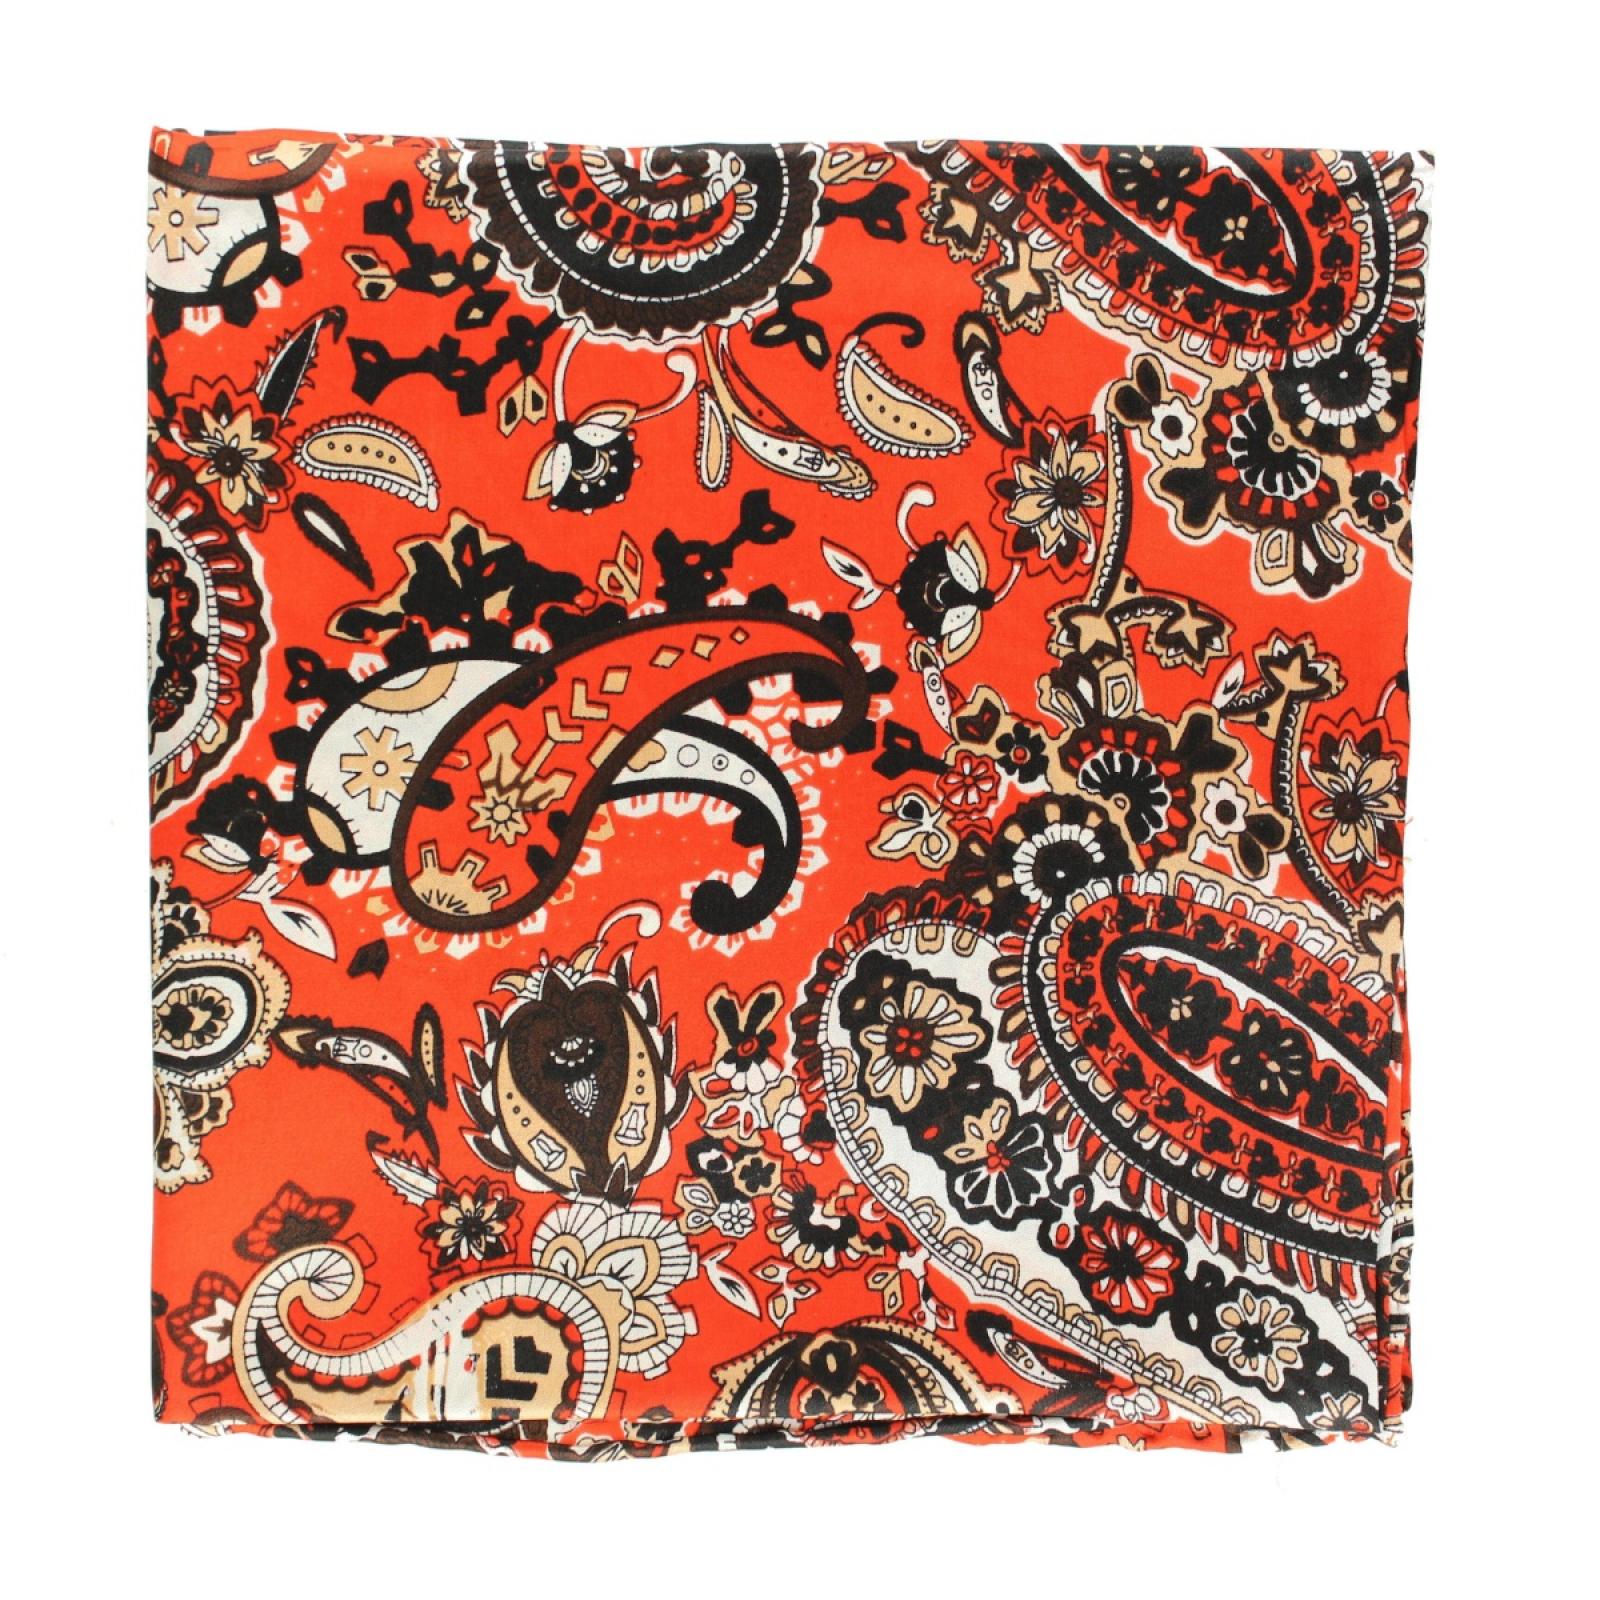 M&F Western Products Paisley Wild Rags Orange